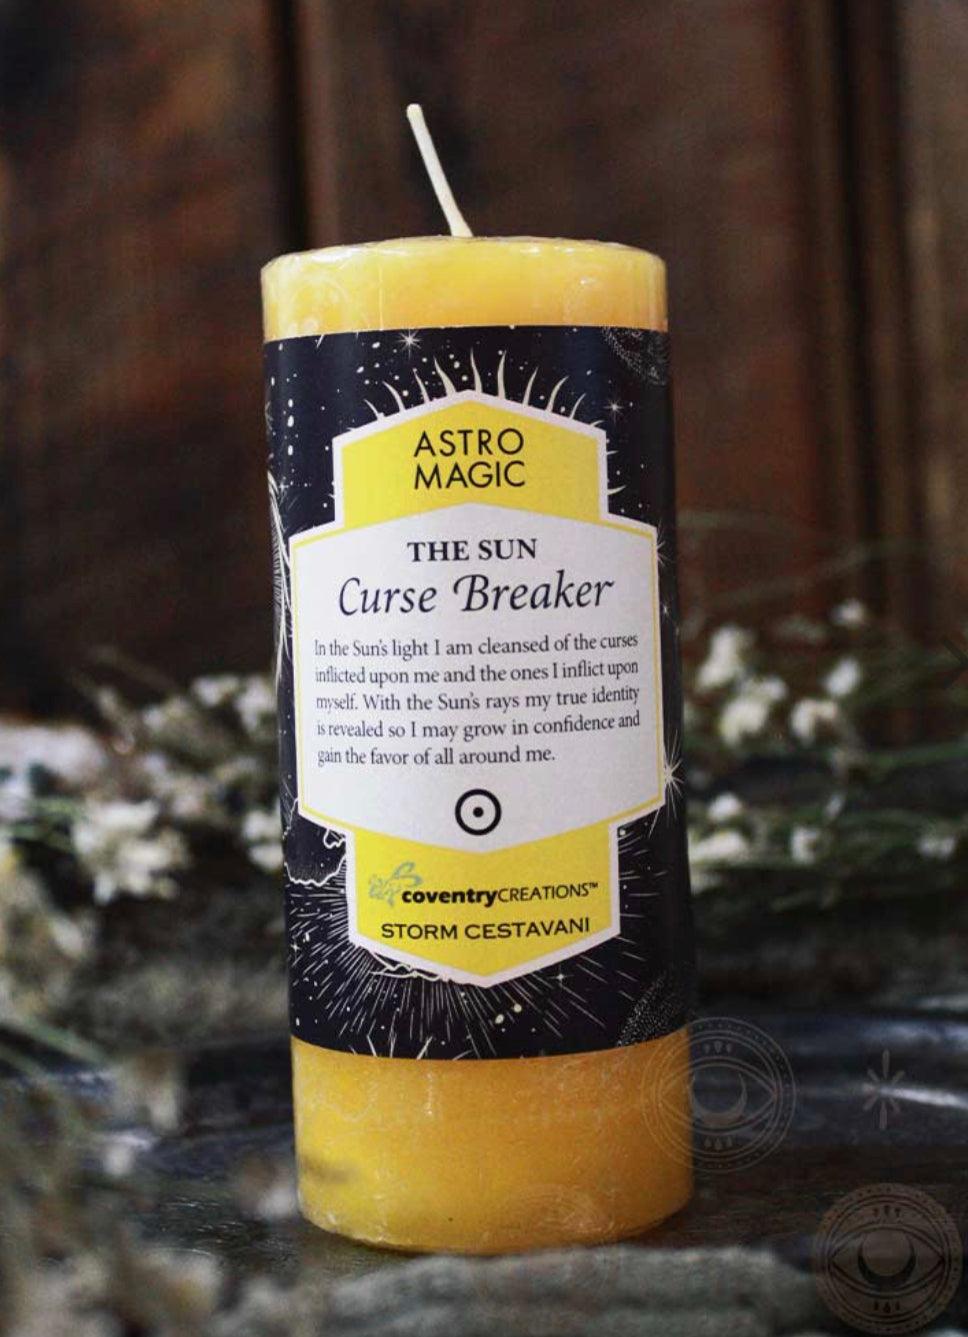 Astro Magic Candle THE SUN Curse Breaker Blessed Herbal Spell Candle - Muse Crystals & Mystical Gifts